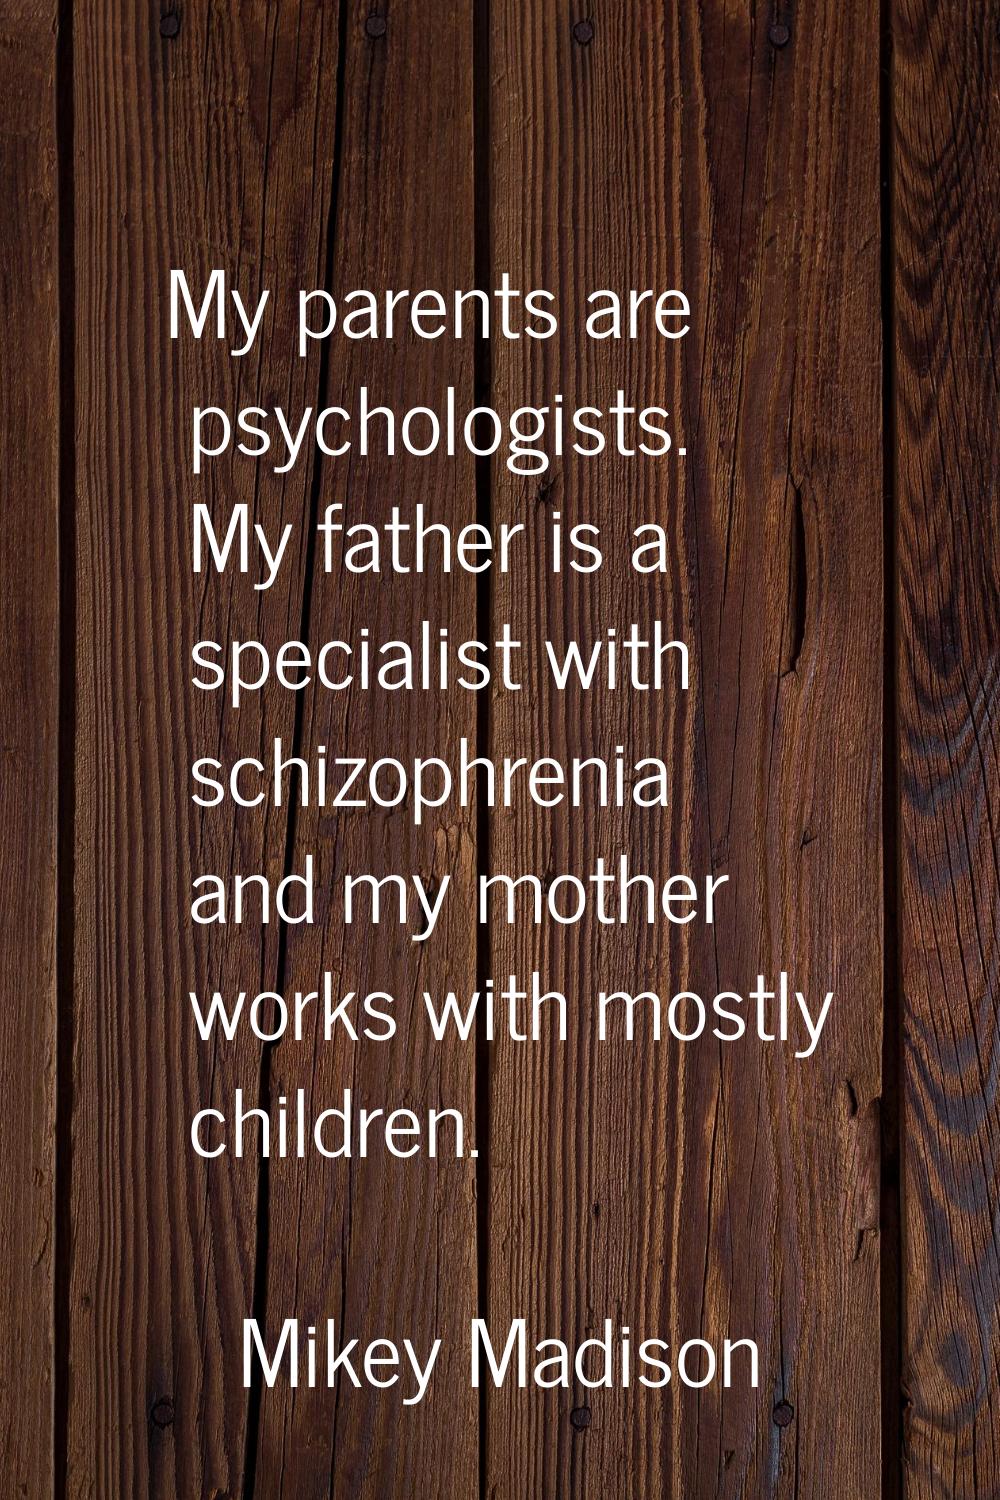 My parents are psychologists. My father is a specialist with schizophrenia and my mother works with